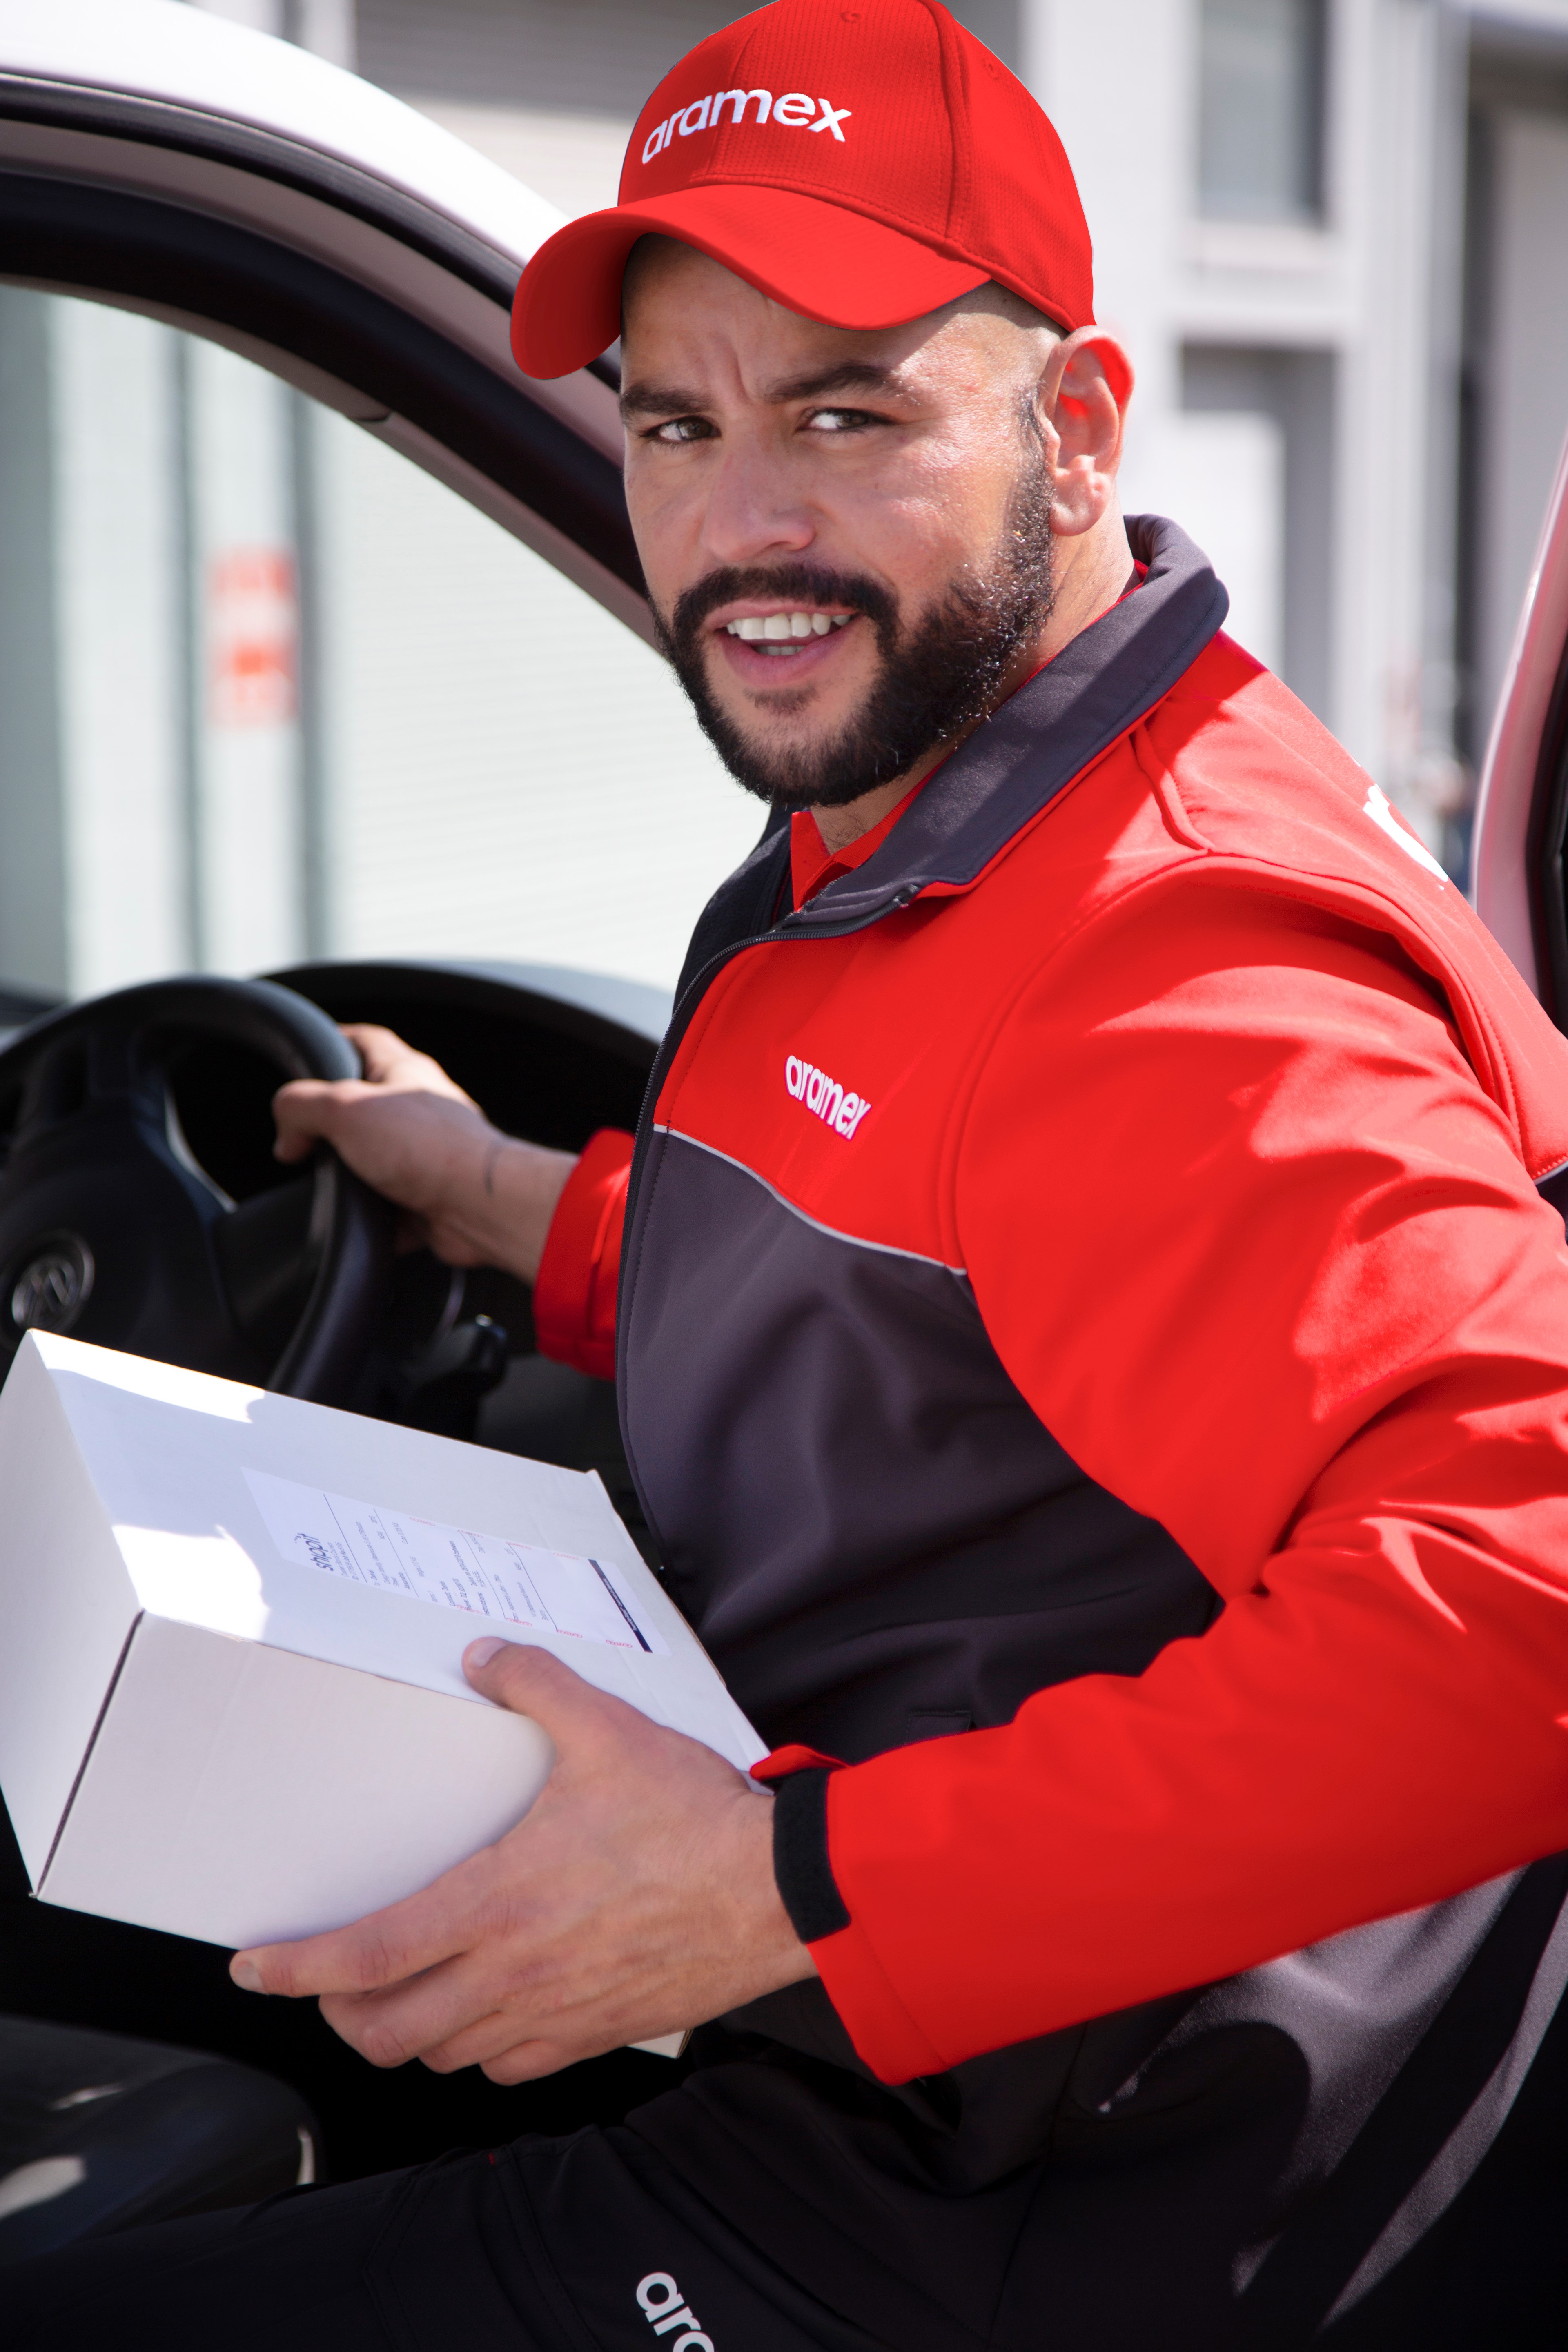 Fastway Couriers takes on global brand name